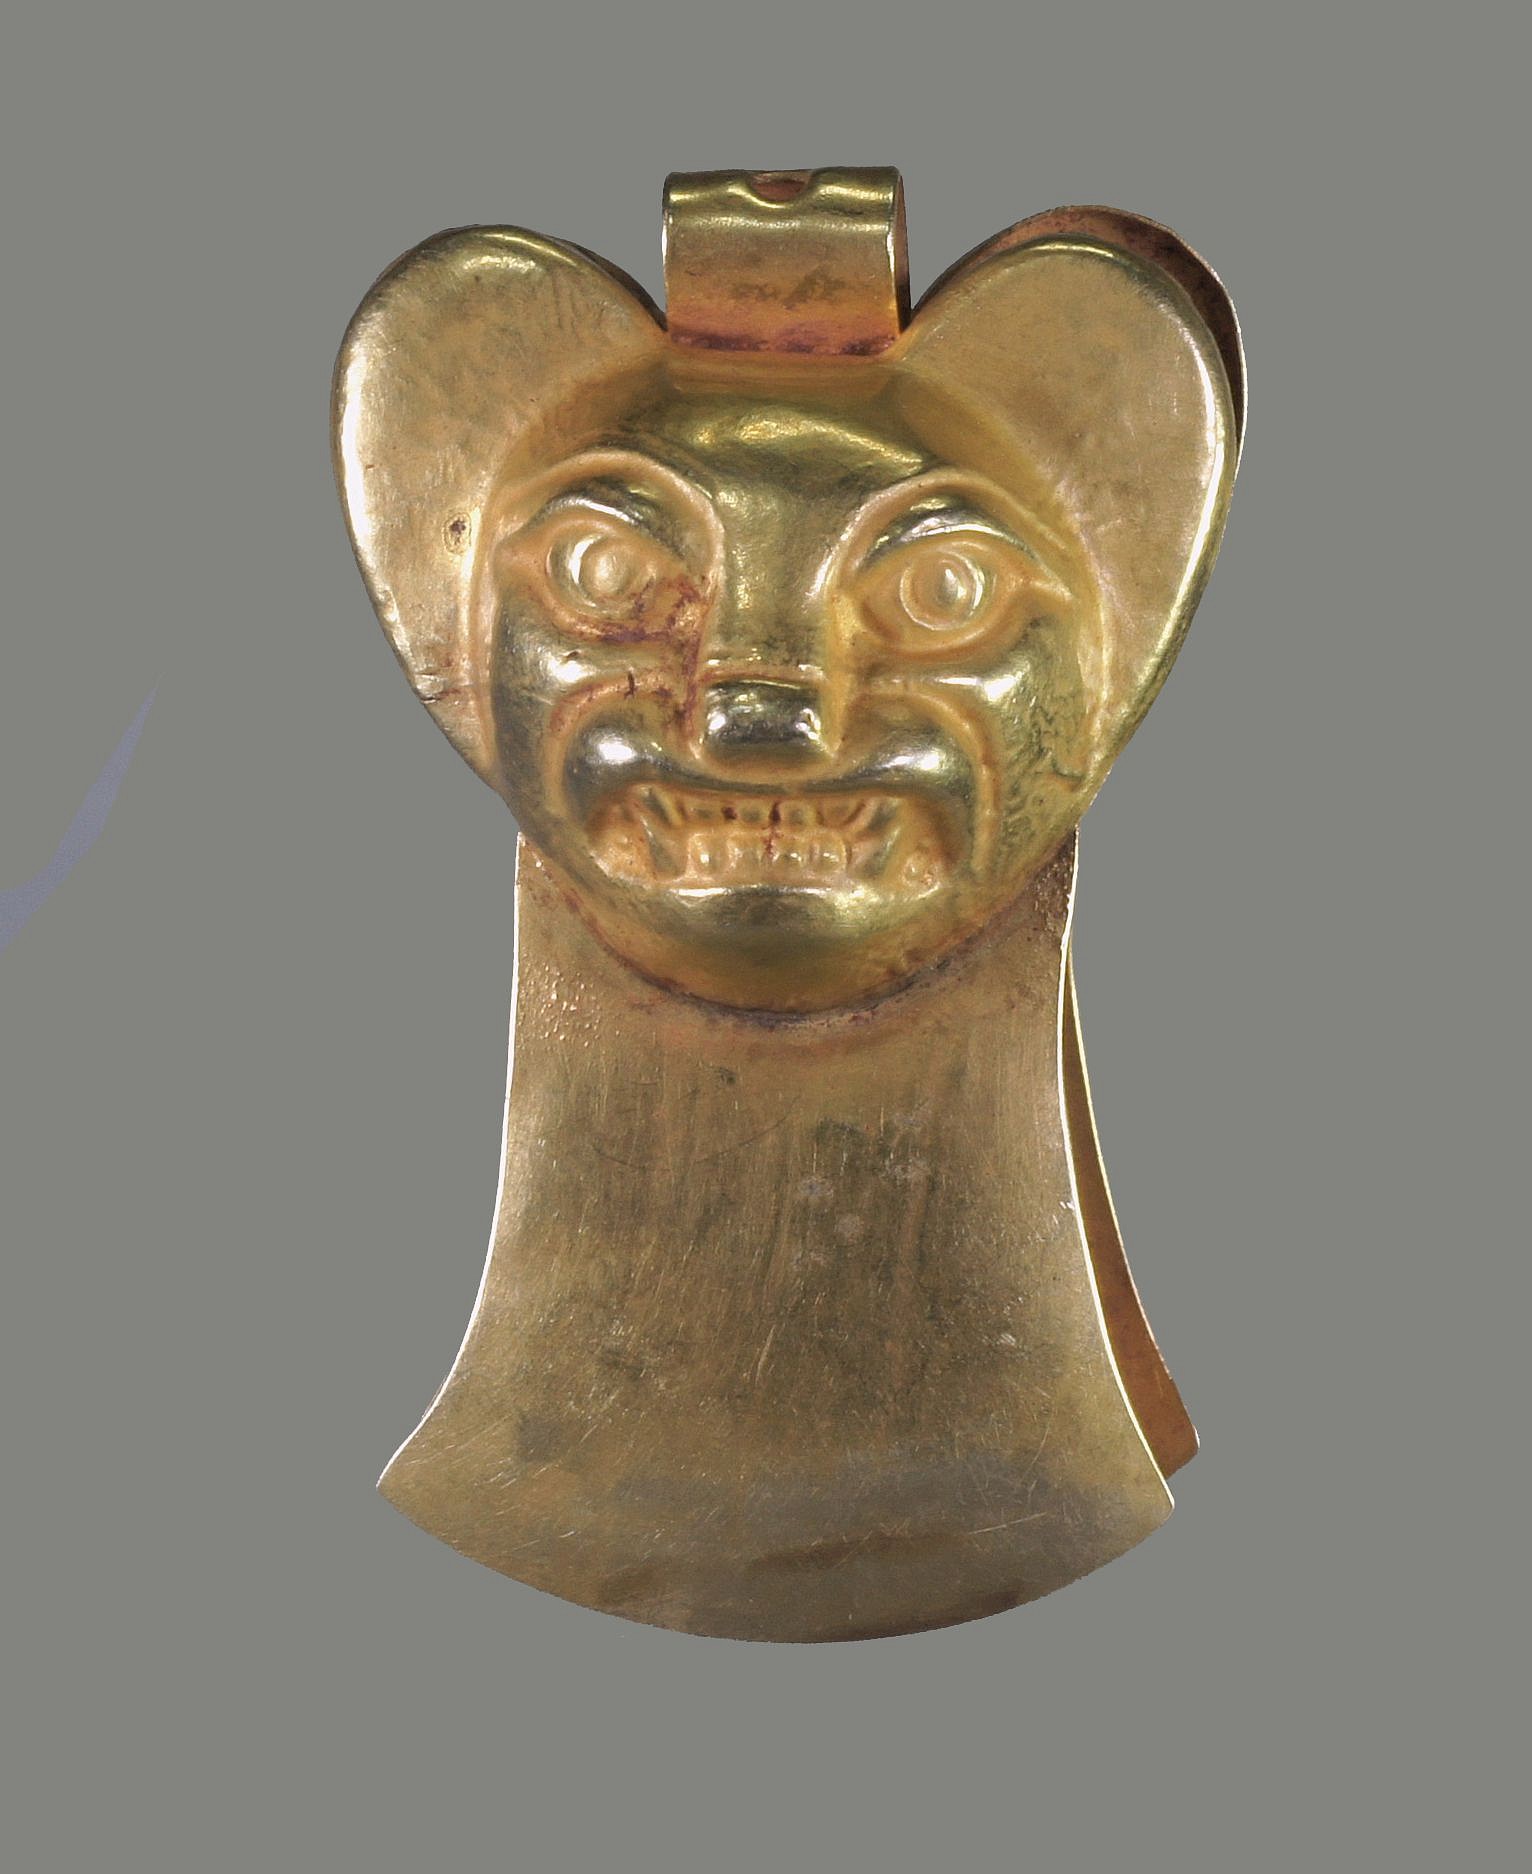 Peru, Moche Gold Tweezers With Embossed Large Eared Bat Face
Pincers have been found from as early as the Vicus period (pre-Moche), circa 300 BC and were thought to be used to pluck facial hair.  Few are known from the Moche period and most of the pincers that have been found were from the Chimu and Inca periods.  This particular pincer has an embossed face of a bat with fanged teeth. This pincer was made from one hammered sheet of high carat gold and embossed twice on a carved wood form of a bat face and bent in the middle.  There is also a suspension hole in the middle.  The blades of the pincer flare out in the form of a Moche back flap. Ex. collection Eduwardo Aldunate, Santiago, Chile-prior to 1970.
Media: Metal
Dimensions: Length: 2 3/8" x Width: 1 1/2"   Weight: 16.6 gramsXRF: Au62.5%, Ag. 34.7%, Cu. 2.5%
$9,750
n7012